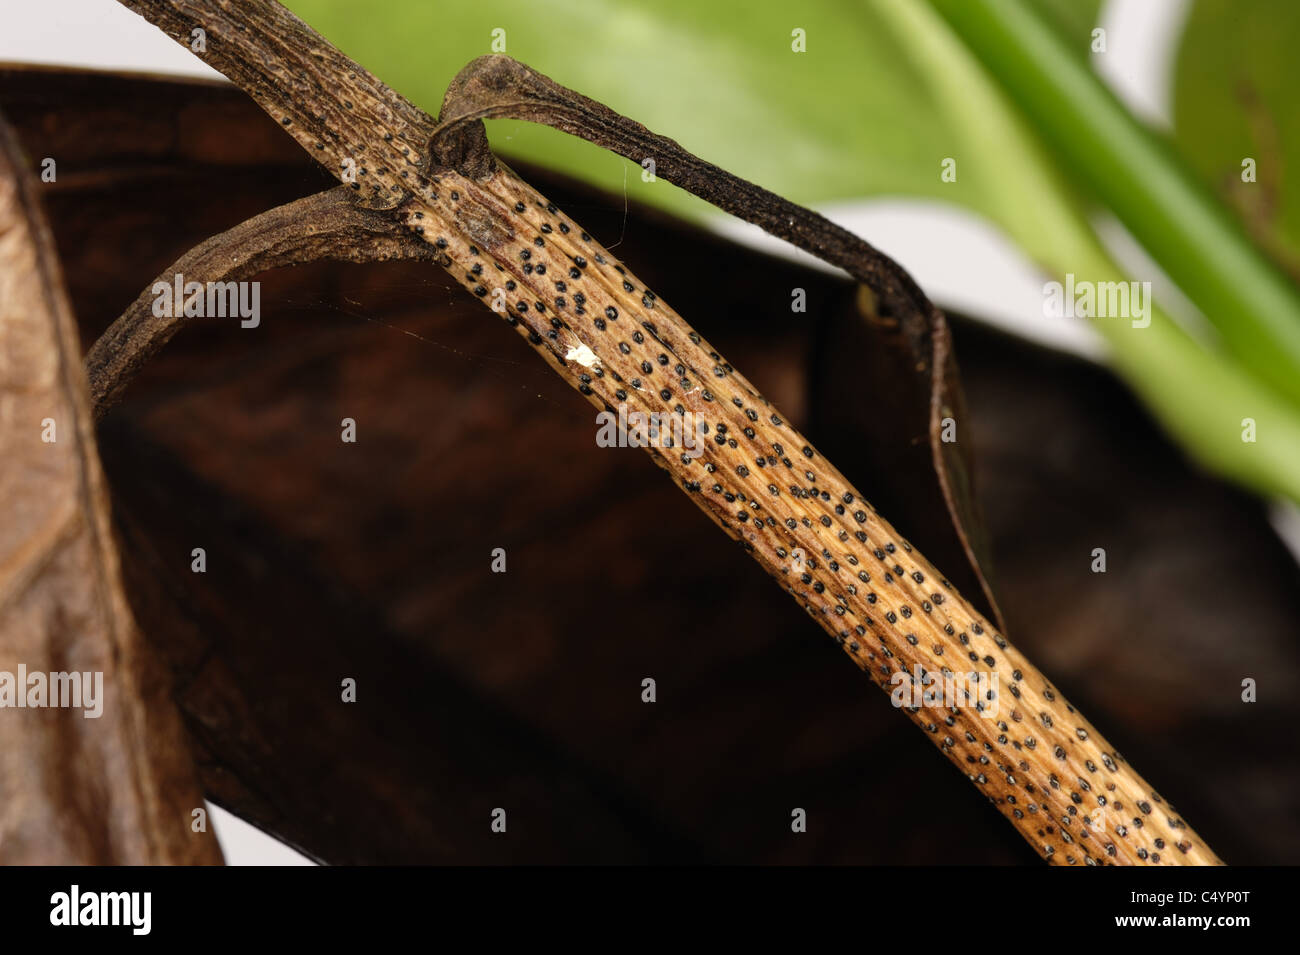 Dieback damage, lesion and fruiting bodies on Aucuba japonica leaves and stem Stock Photo